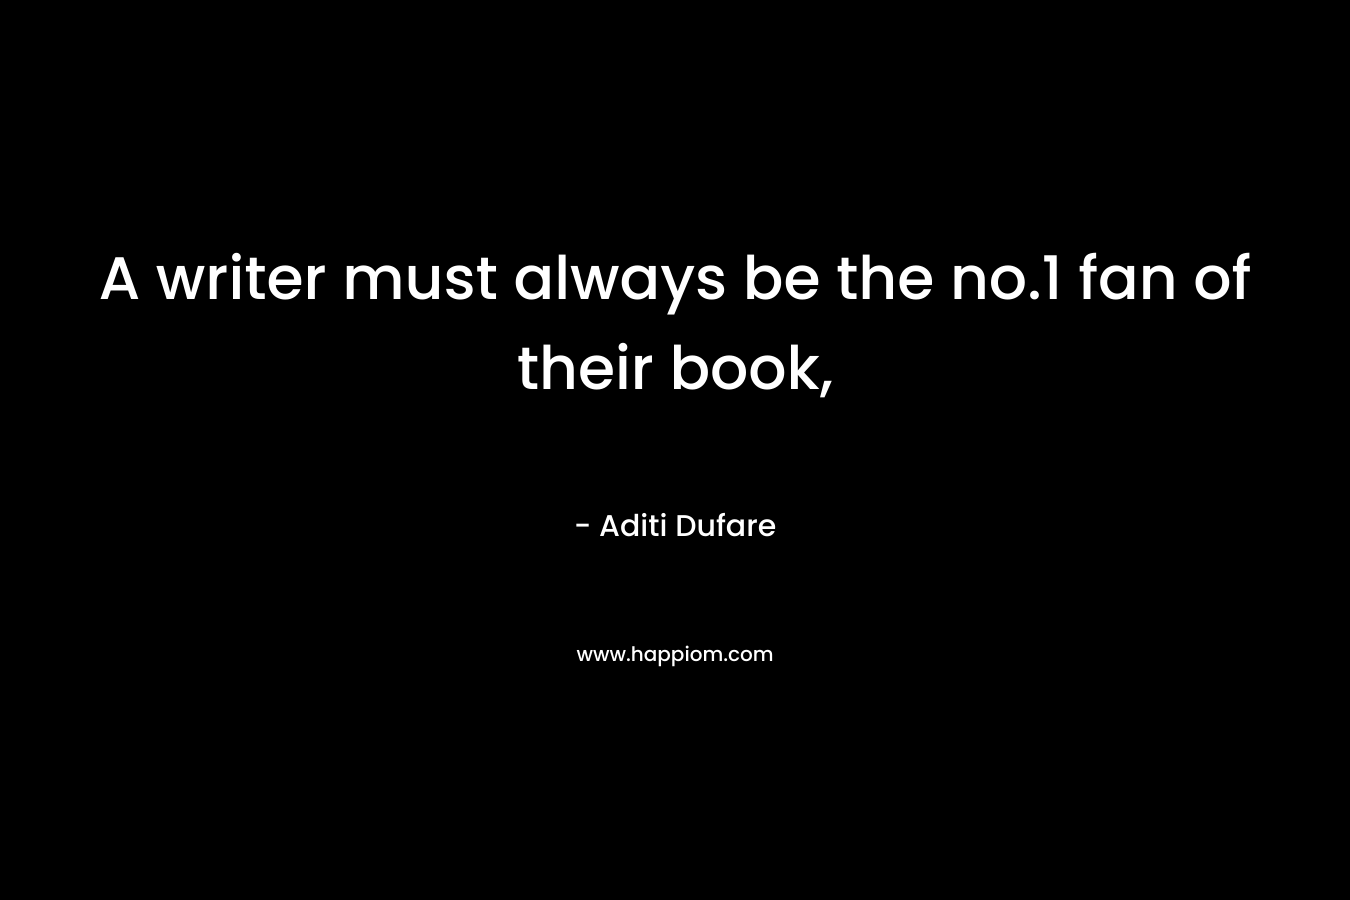 A writer must always be the no.1 fan of their book, – Aditi Dufare